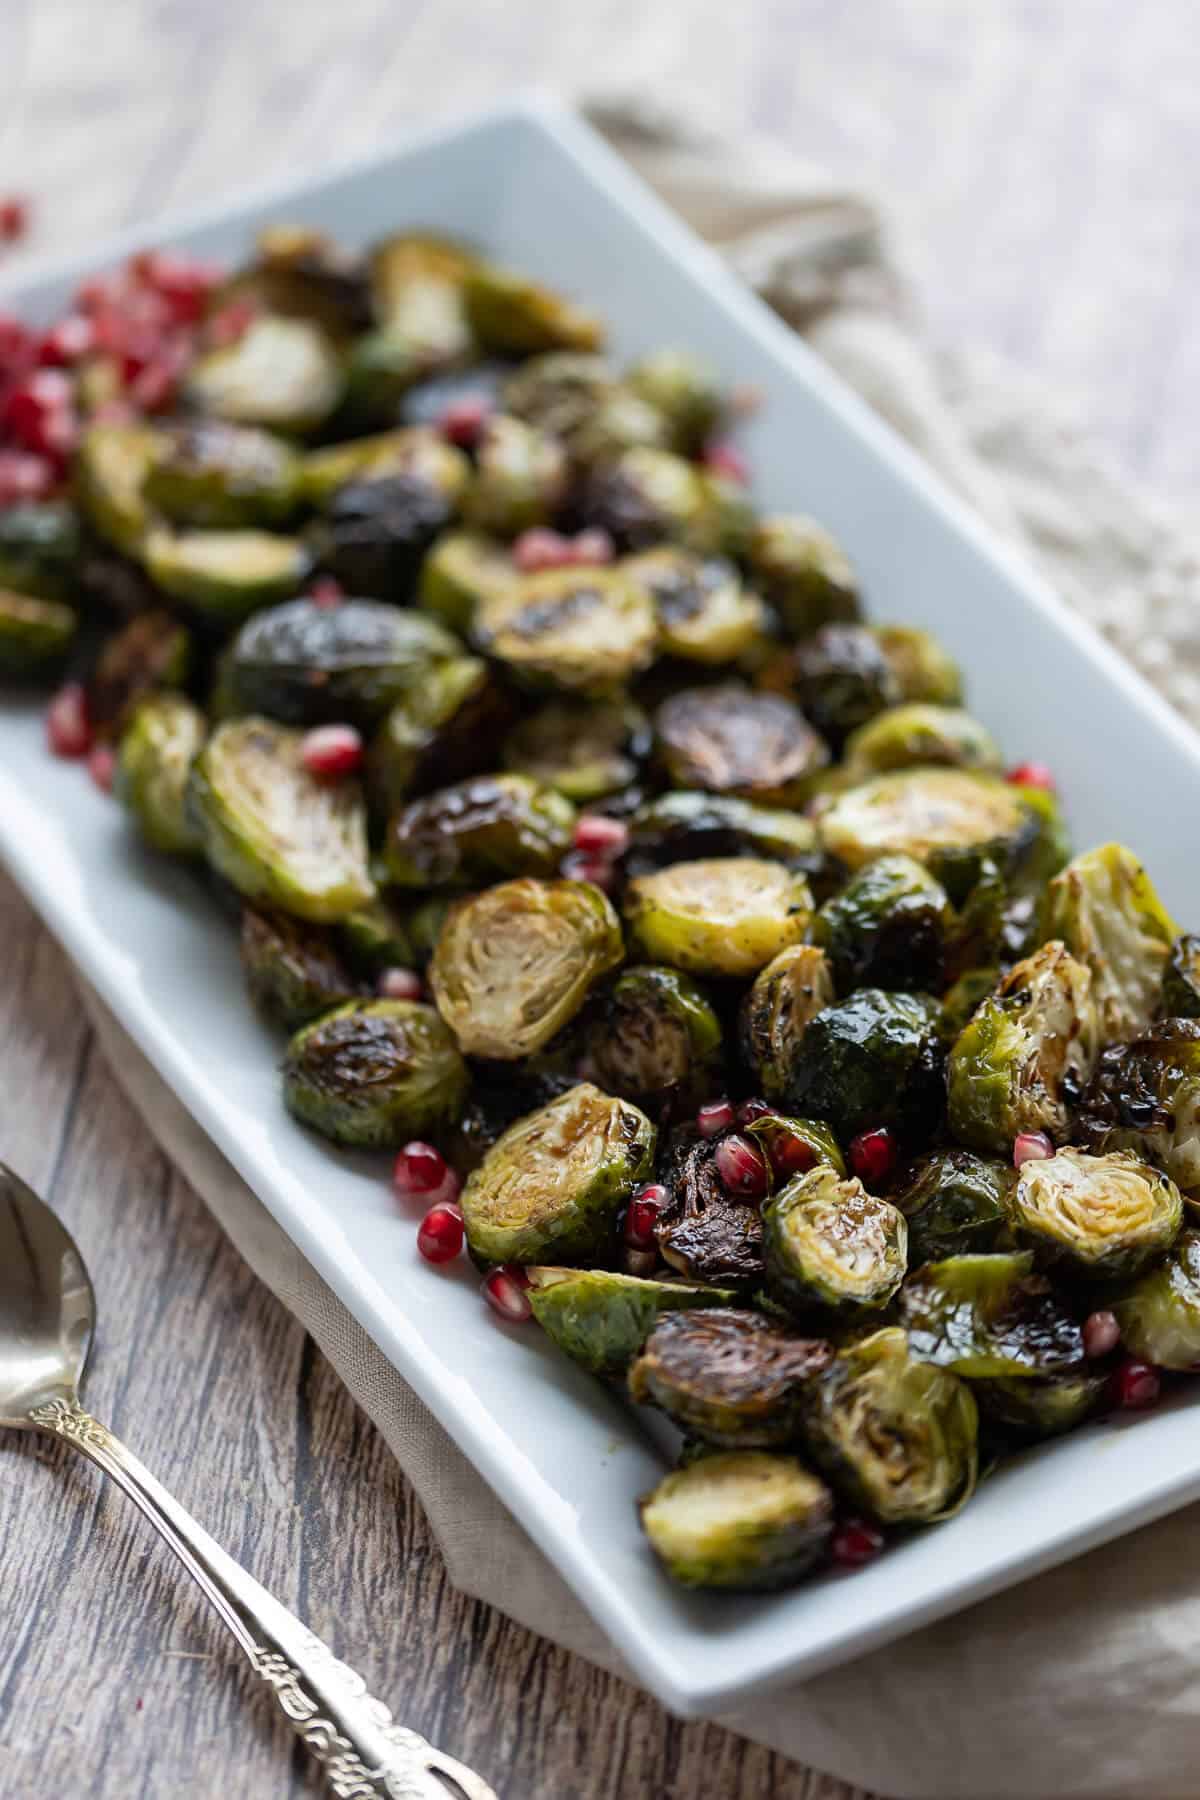 Platter of roasted brussels sprouts garnished with pomegranate seeds.